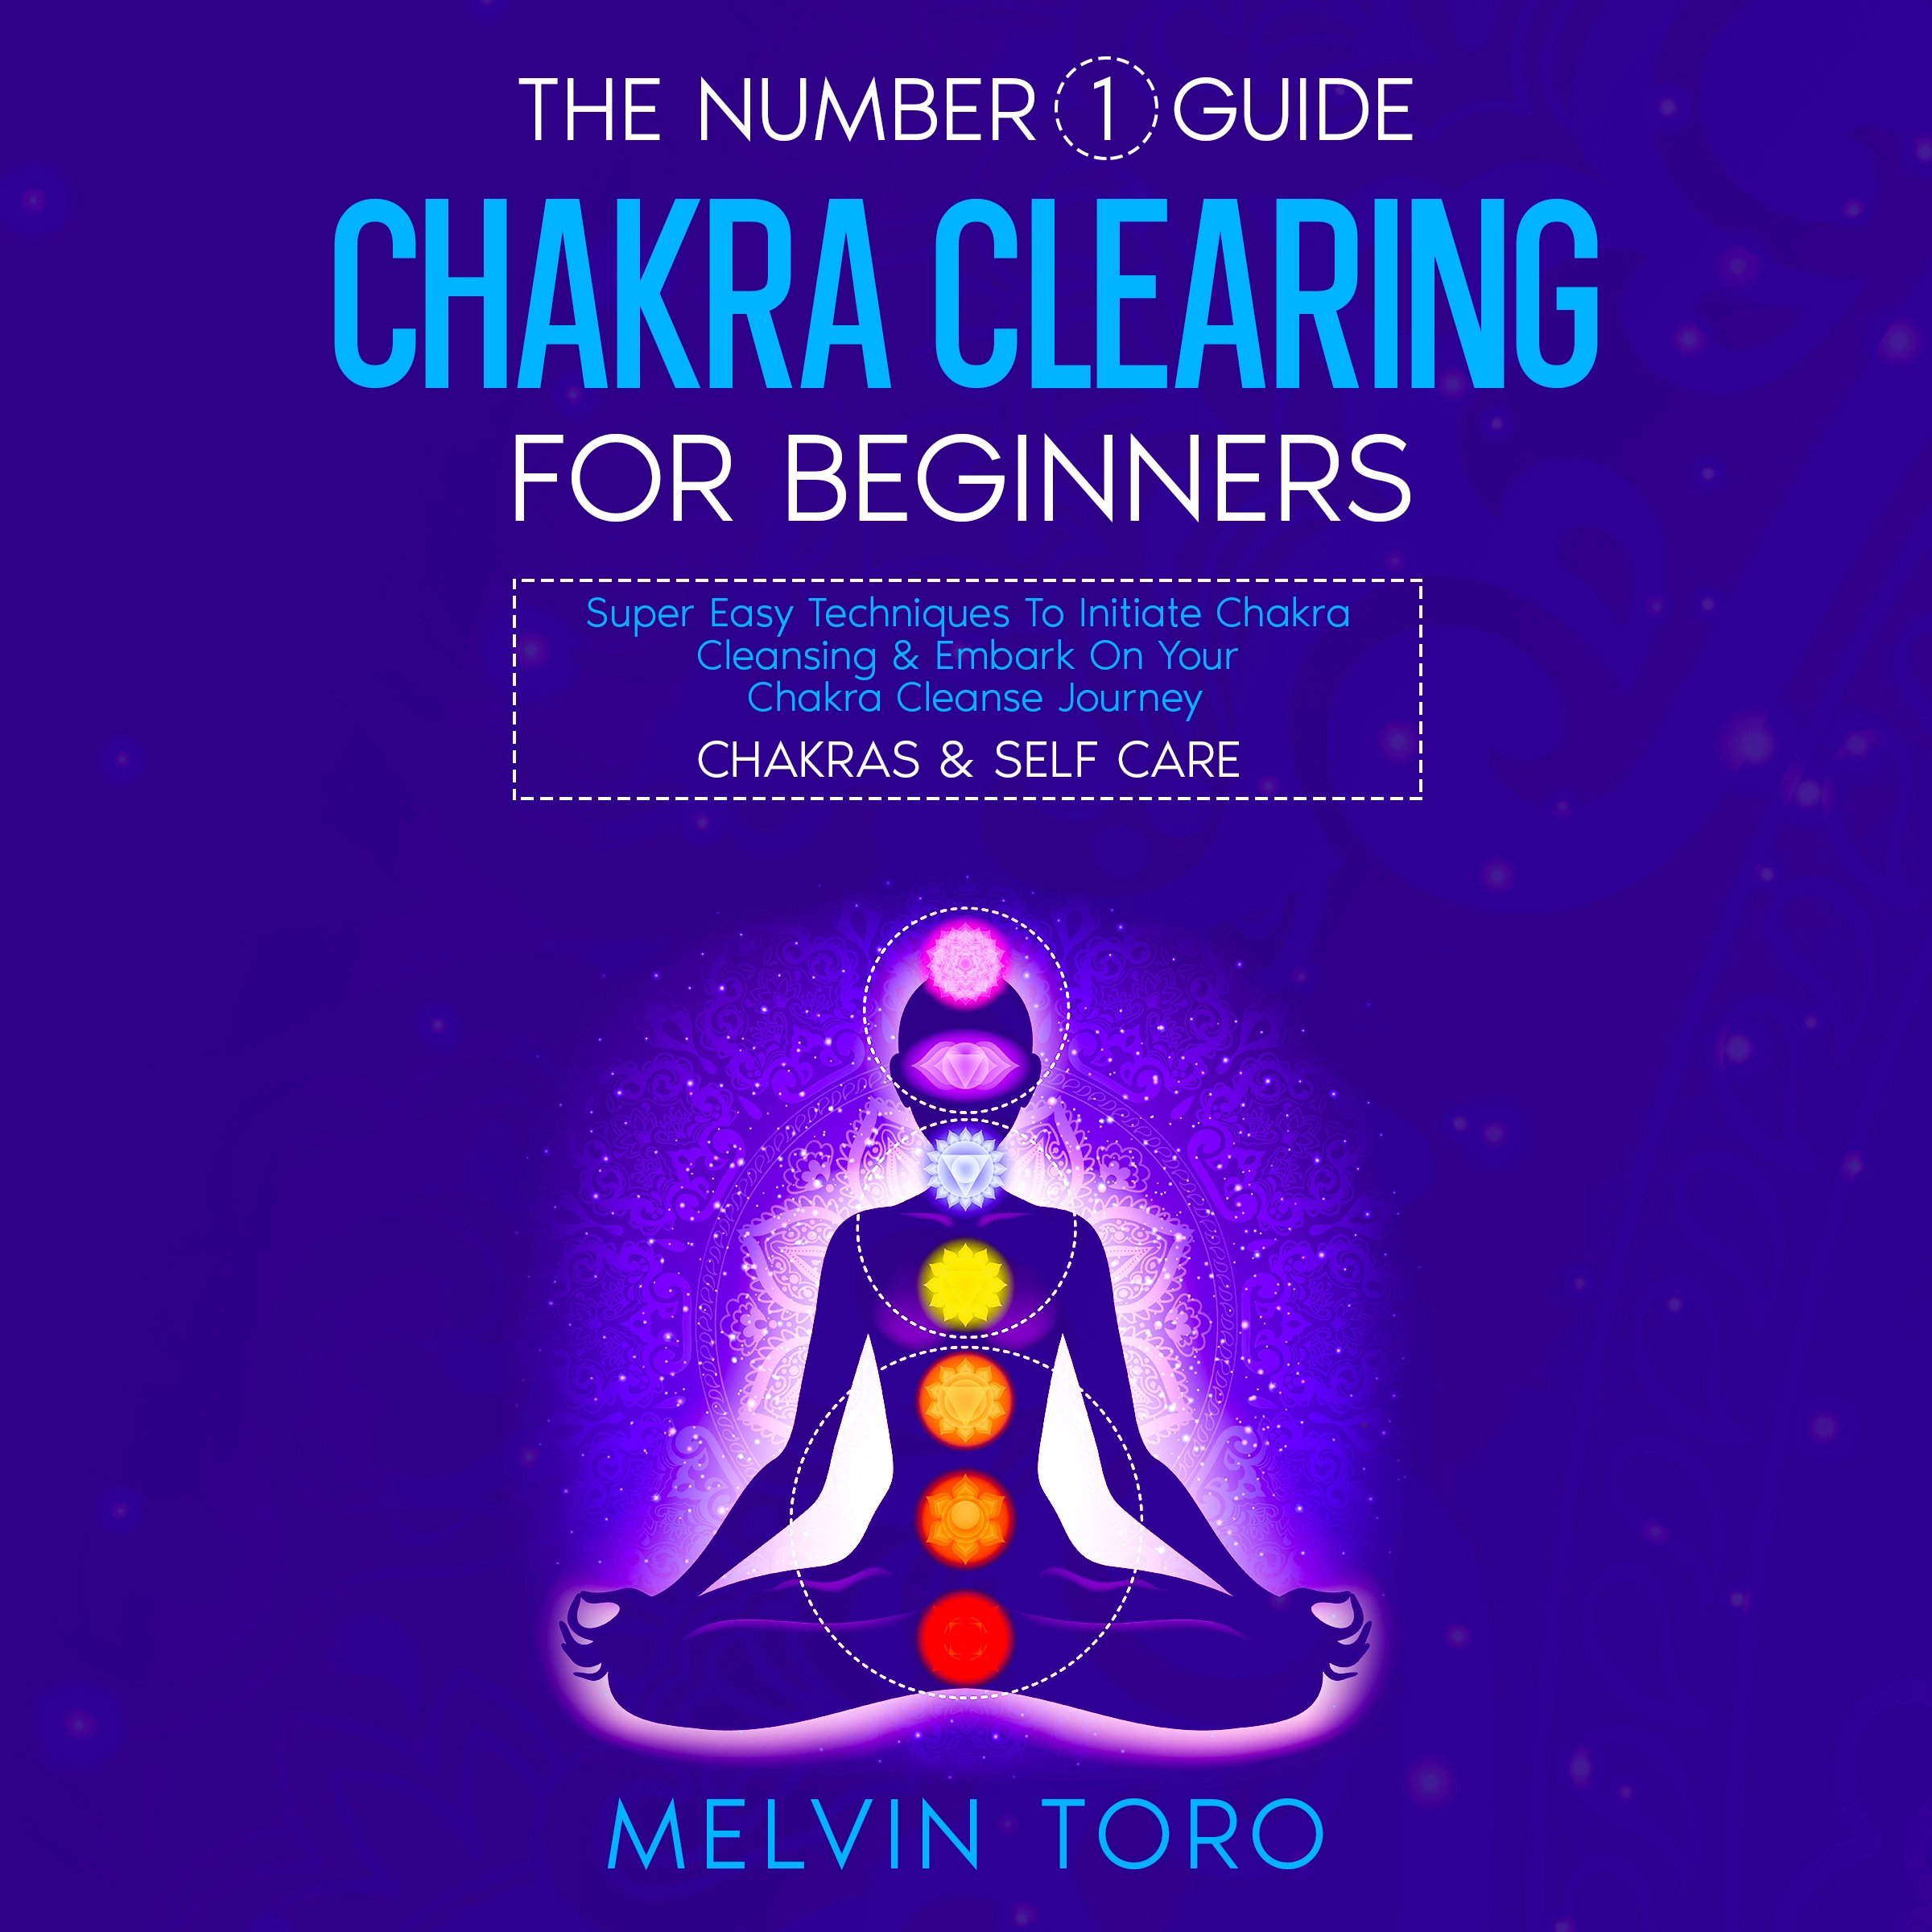 The Number 1 Guide: Chakra Clearing For Beginners by Melvin Toro Audiobook